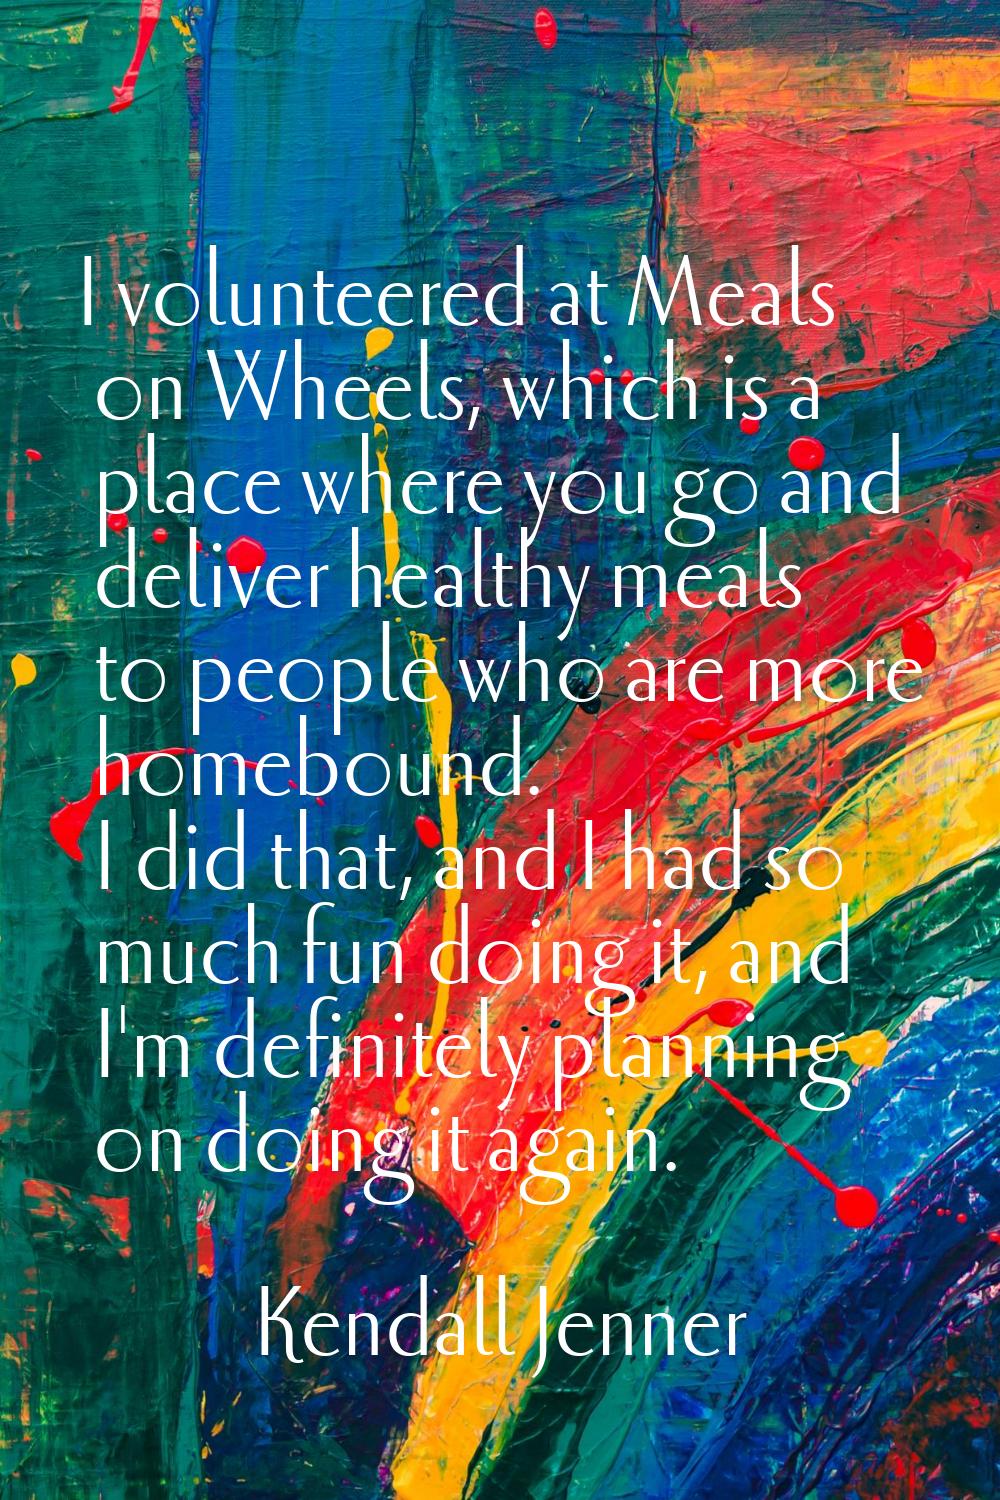 I volunteered at Meals on Wheels, which is a place where you go and deliver healthy meals to people